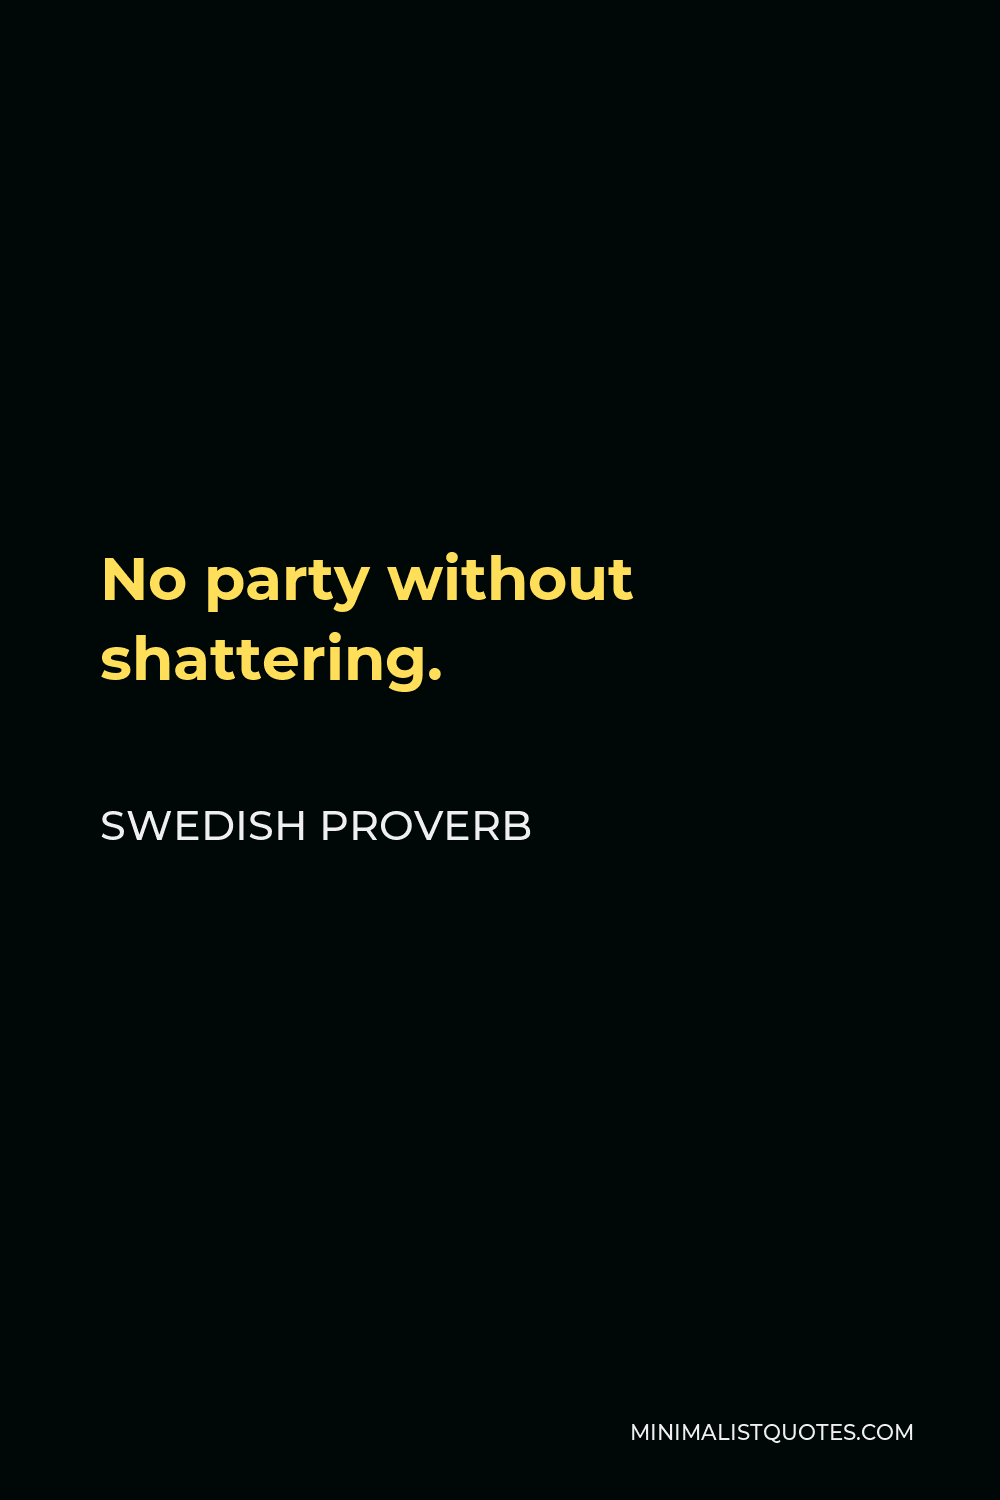 Swedish Proverb Quote - No party without shattering.